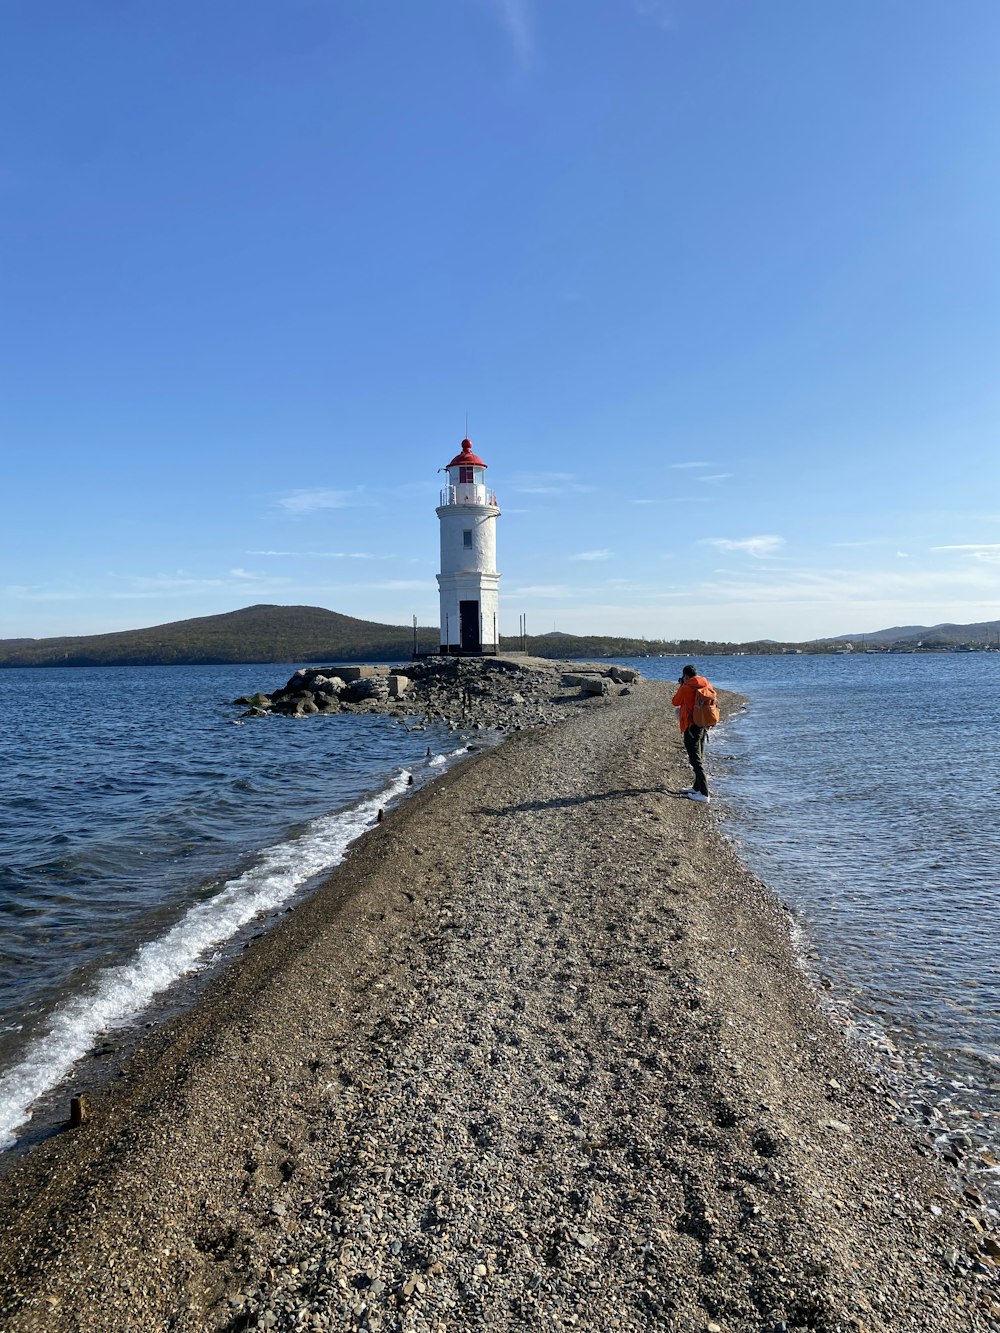 a person walking on a beach next to a light house